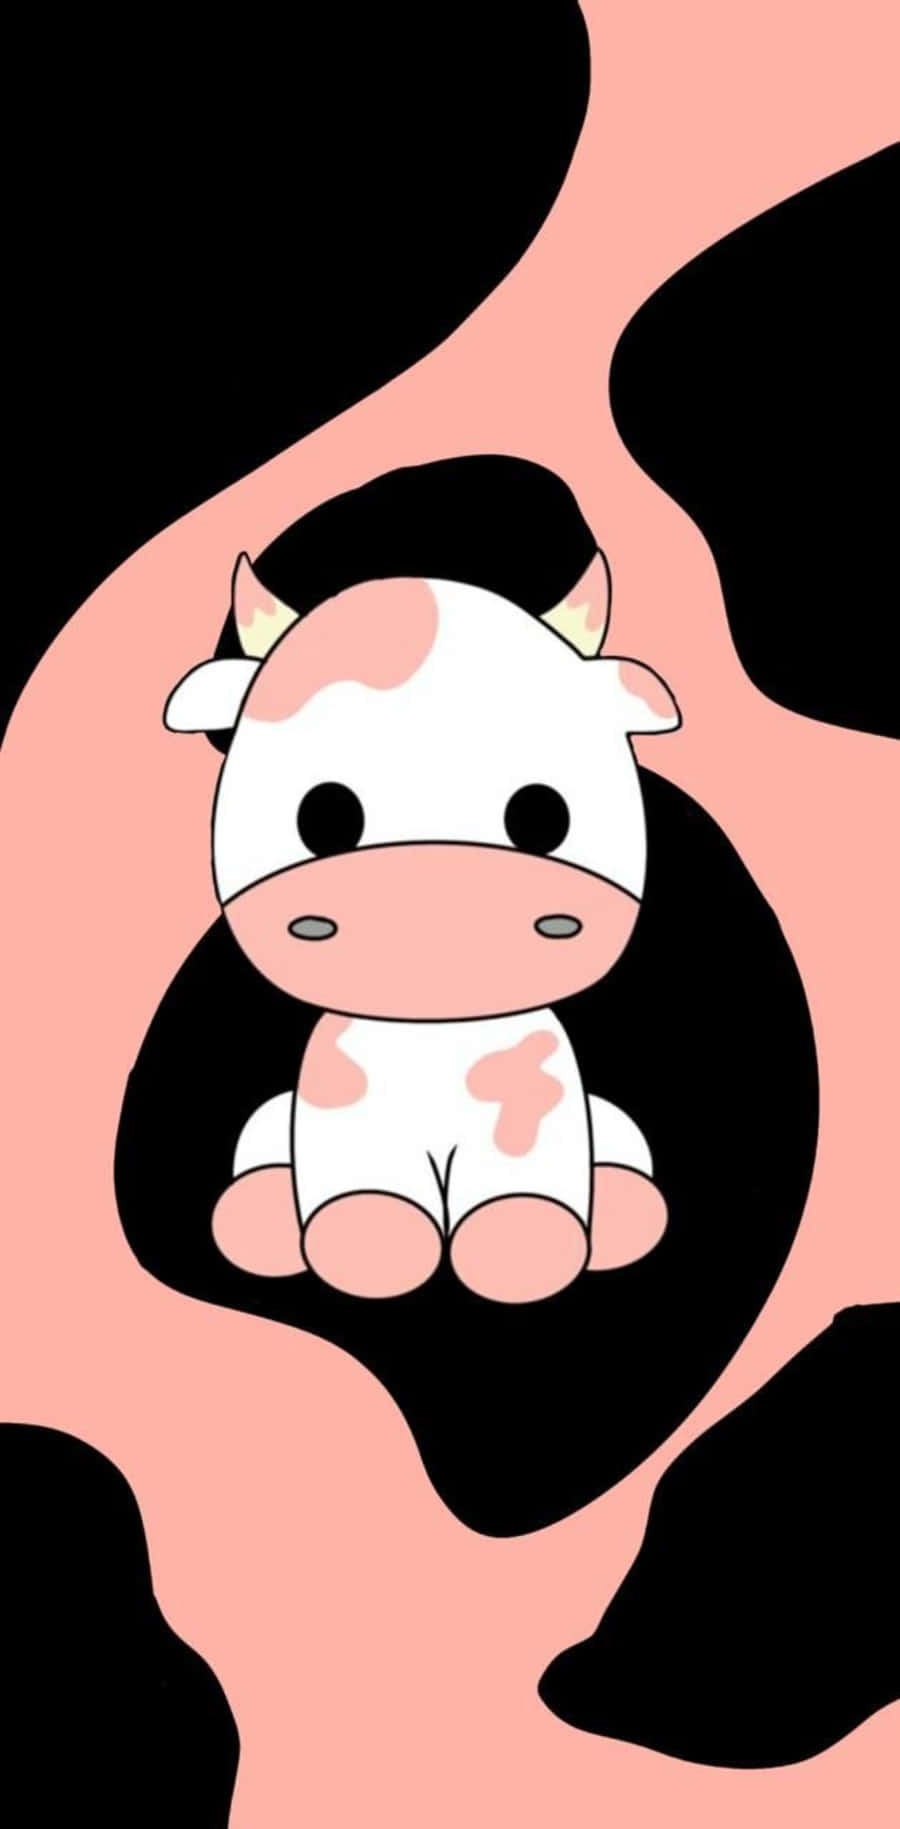 Cute Cow Wallpaper Images  Free Download on Freepik